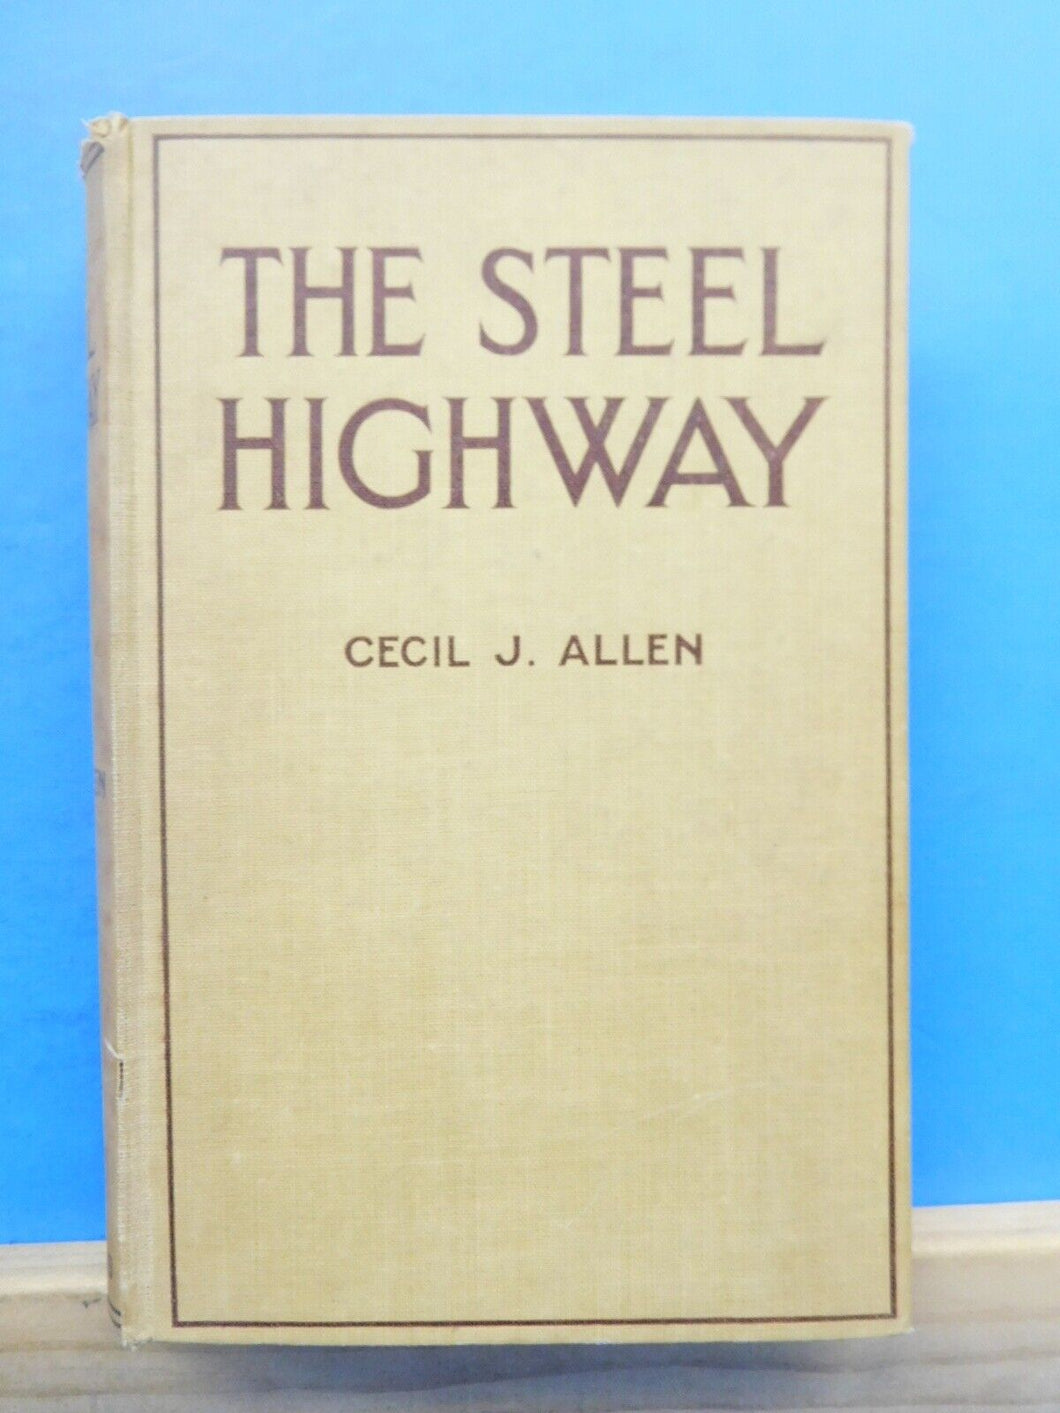 Steel Highway, The  Cecil Allen Hard Cover 1928 8 colored plates  illustrations